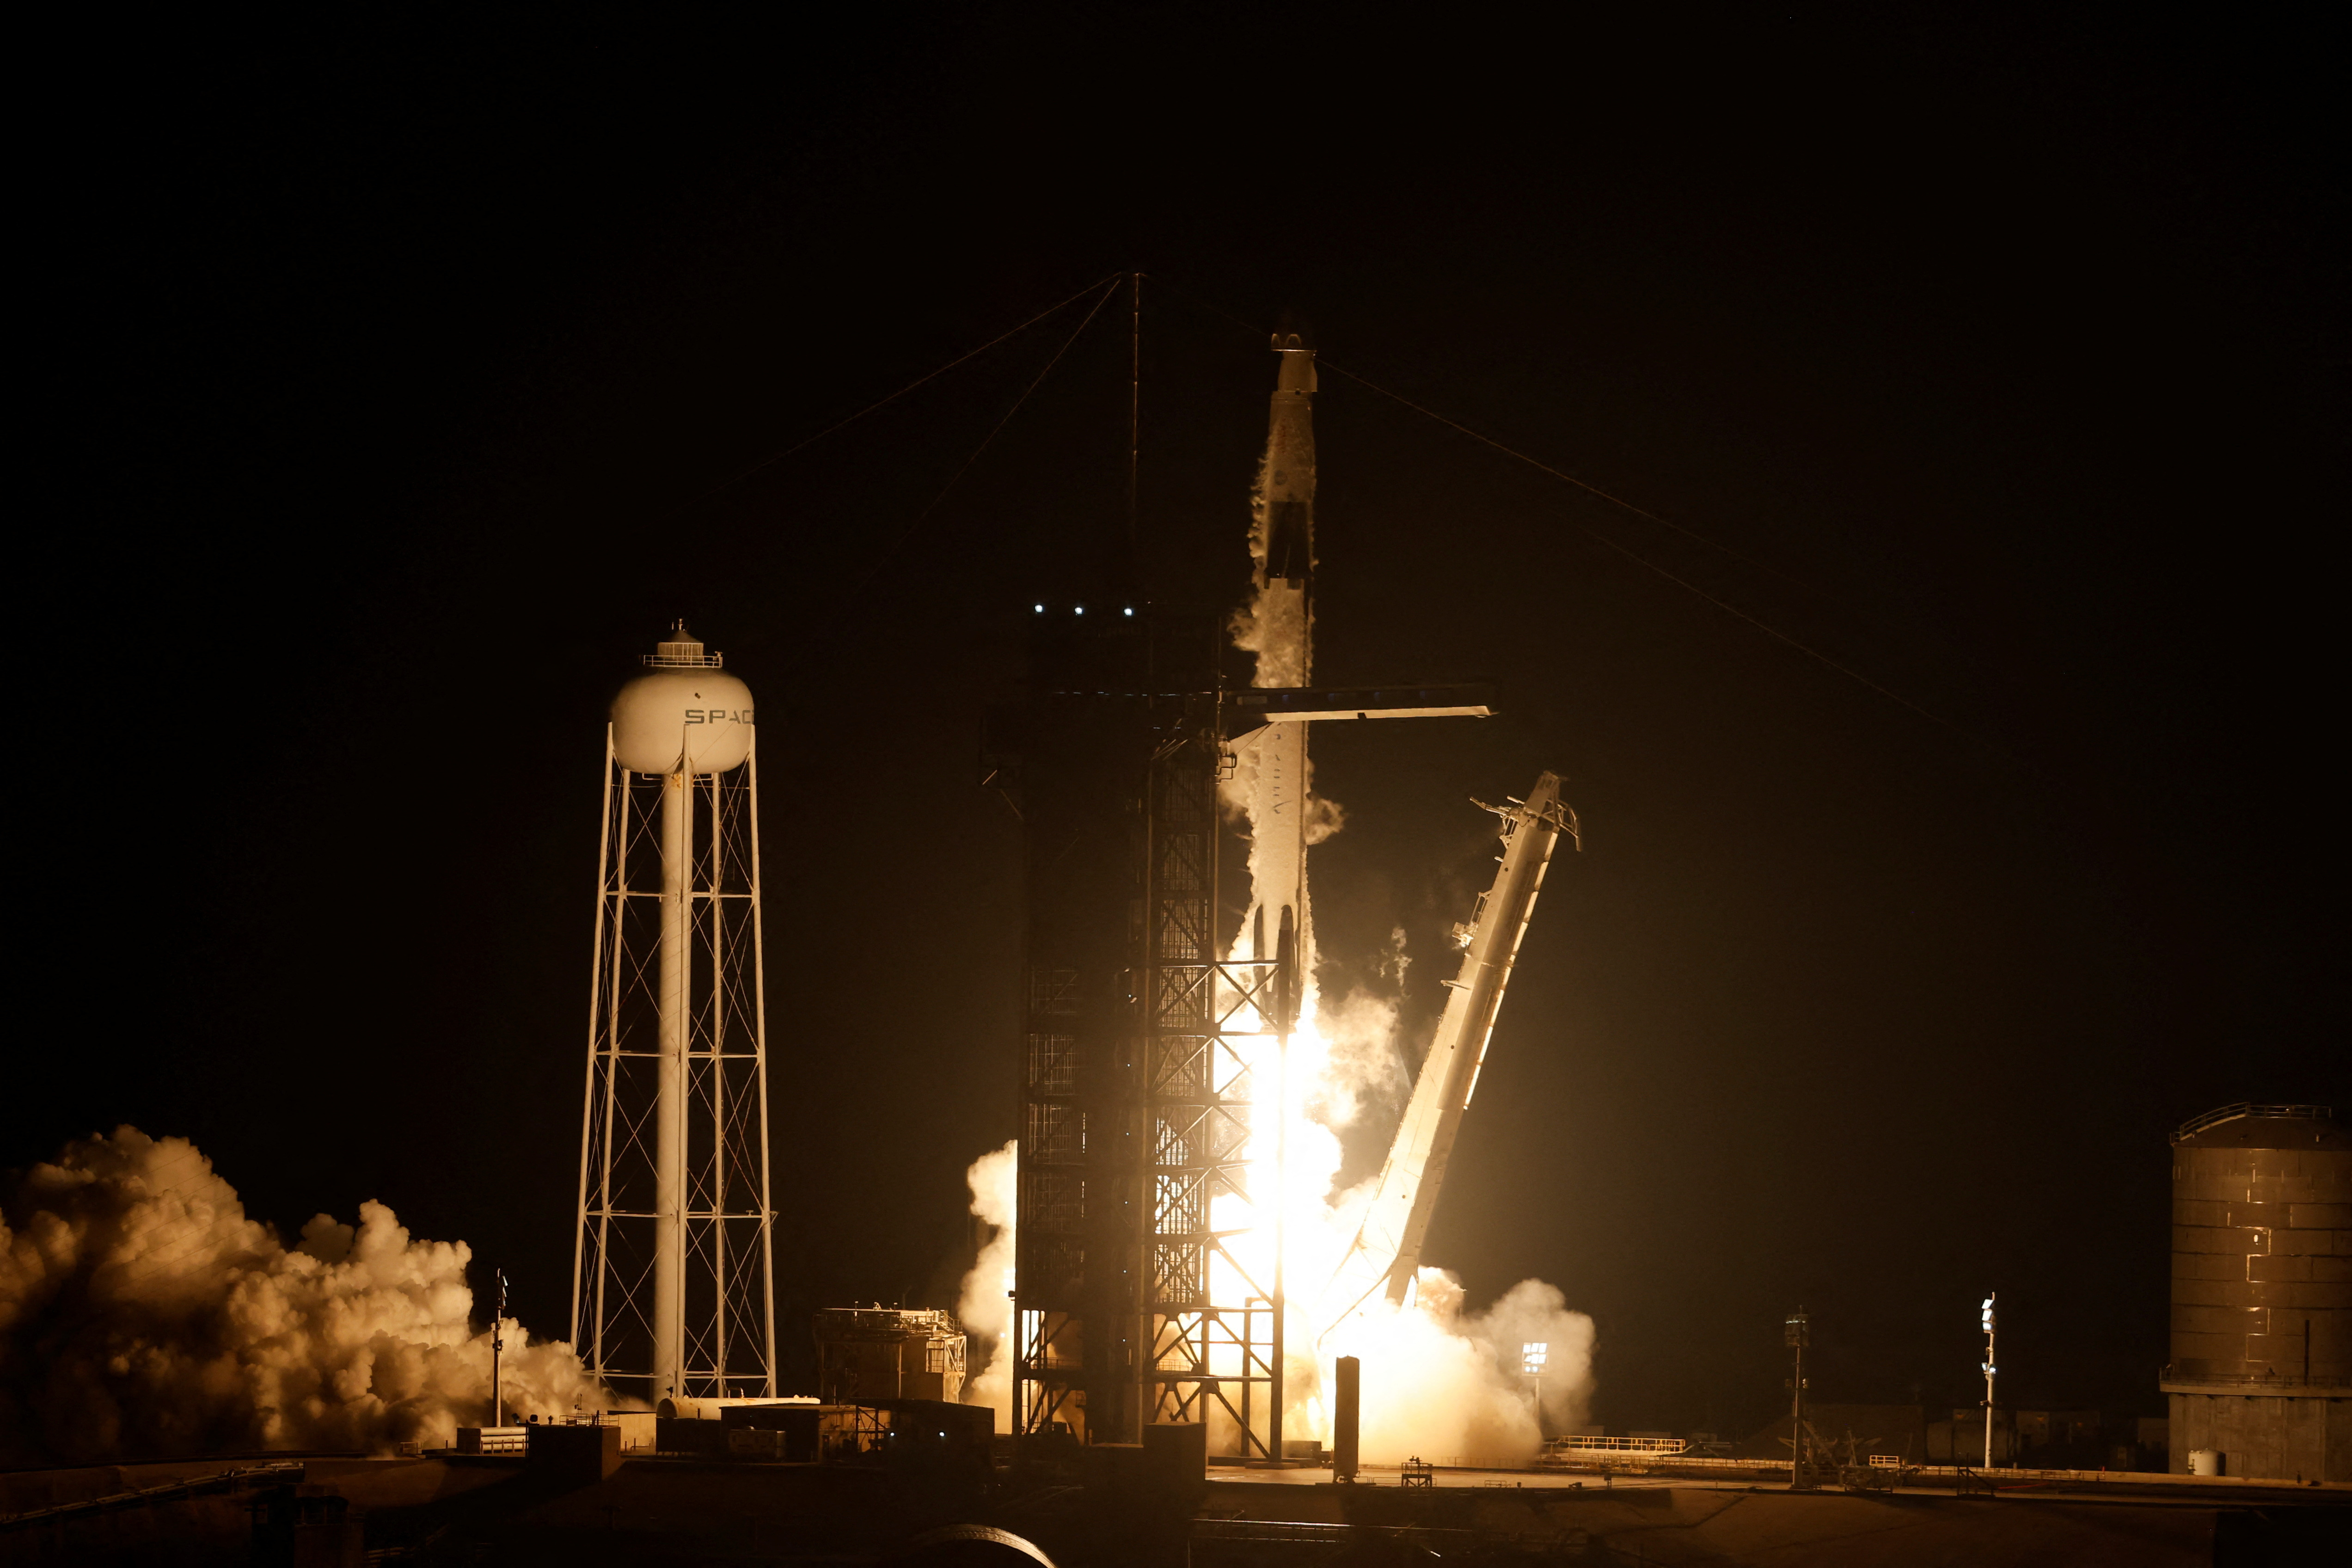 NASA's SpaceX Crew-6 mission launches to the International Space Station from the Kennedy Space Center in Cape Canaveral